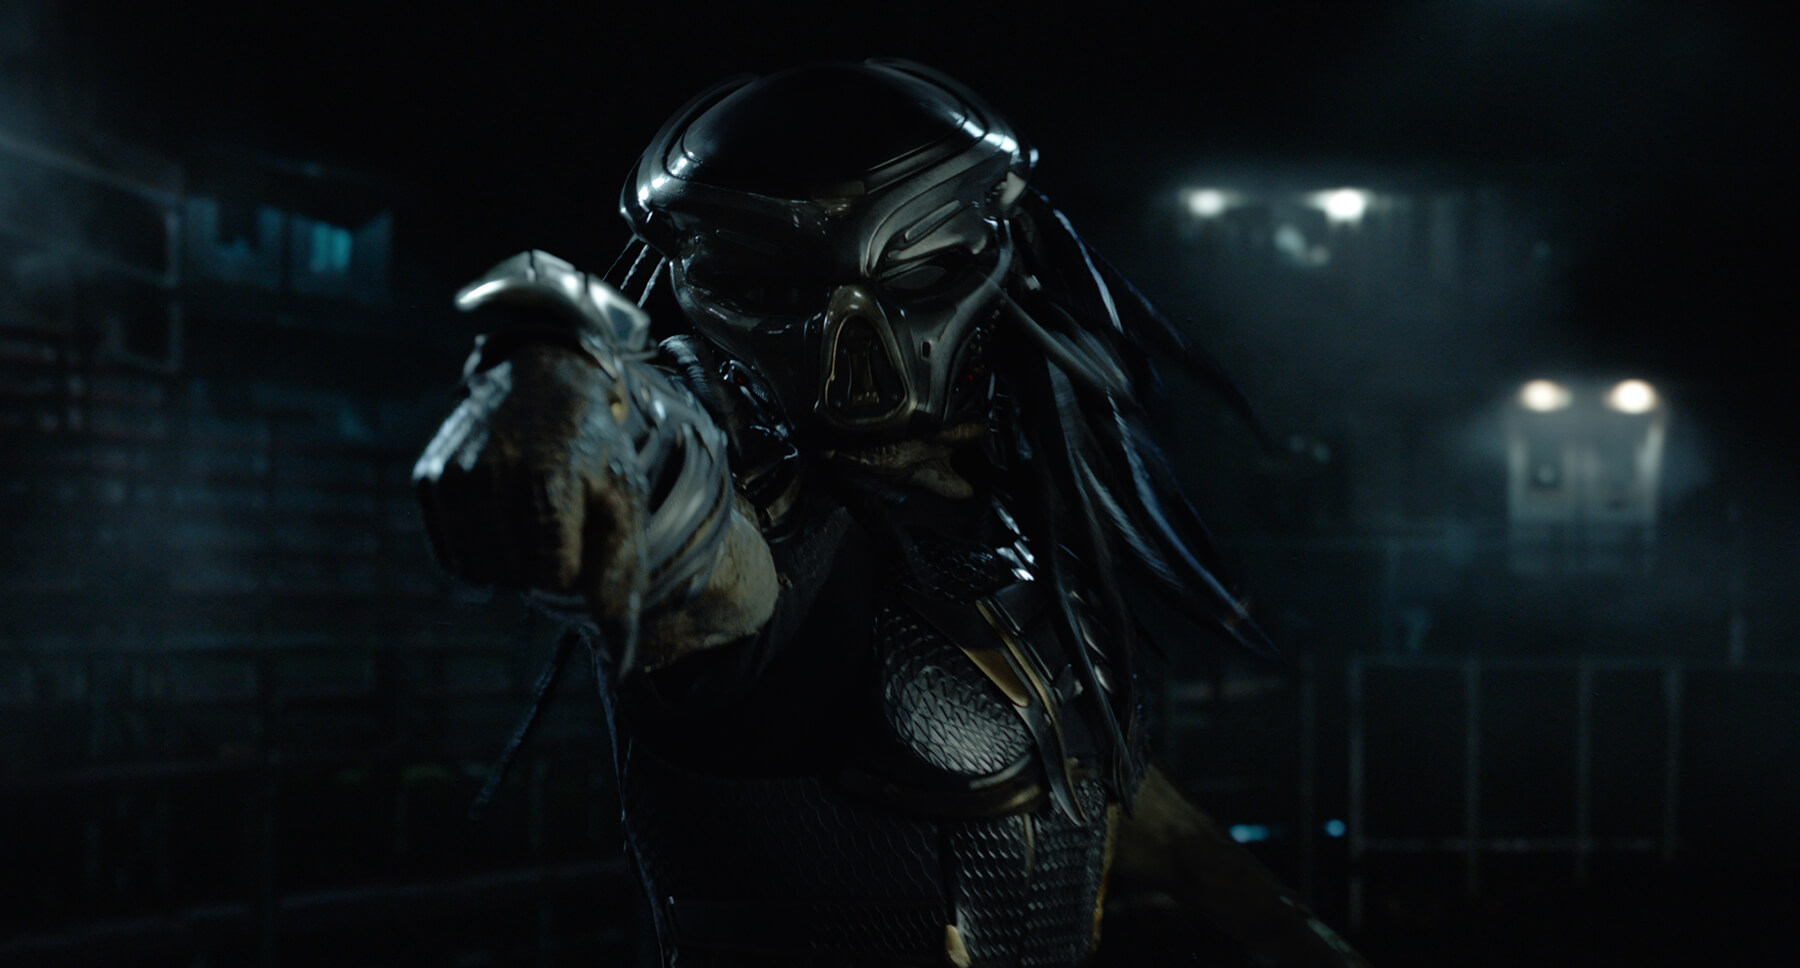 THE PREDATOR [Film Review]: Trophy Hunting for Trash.